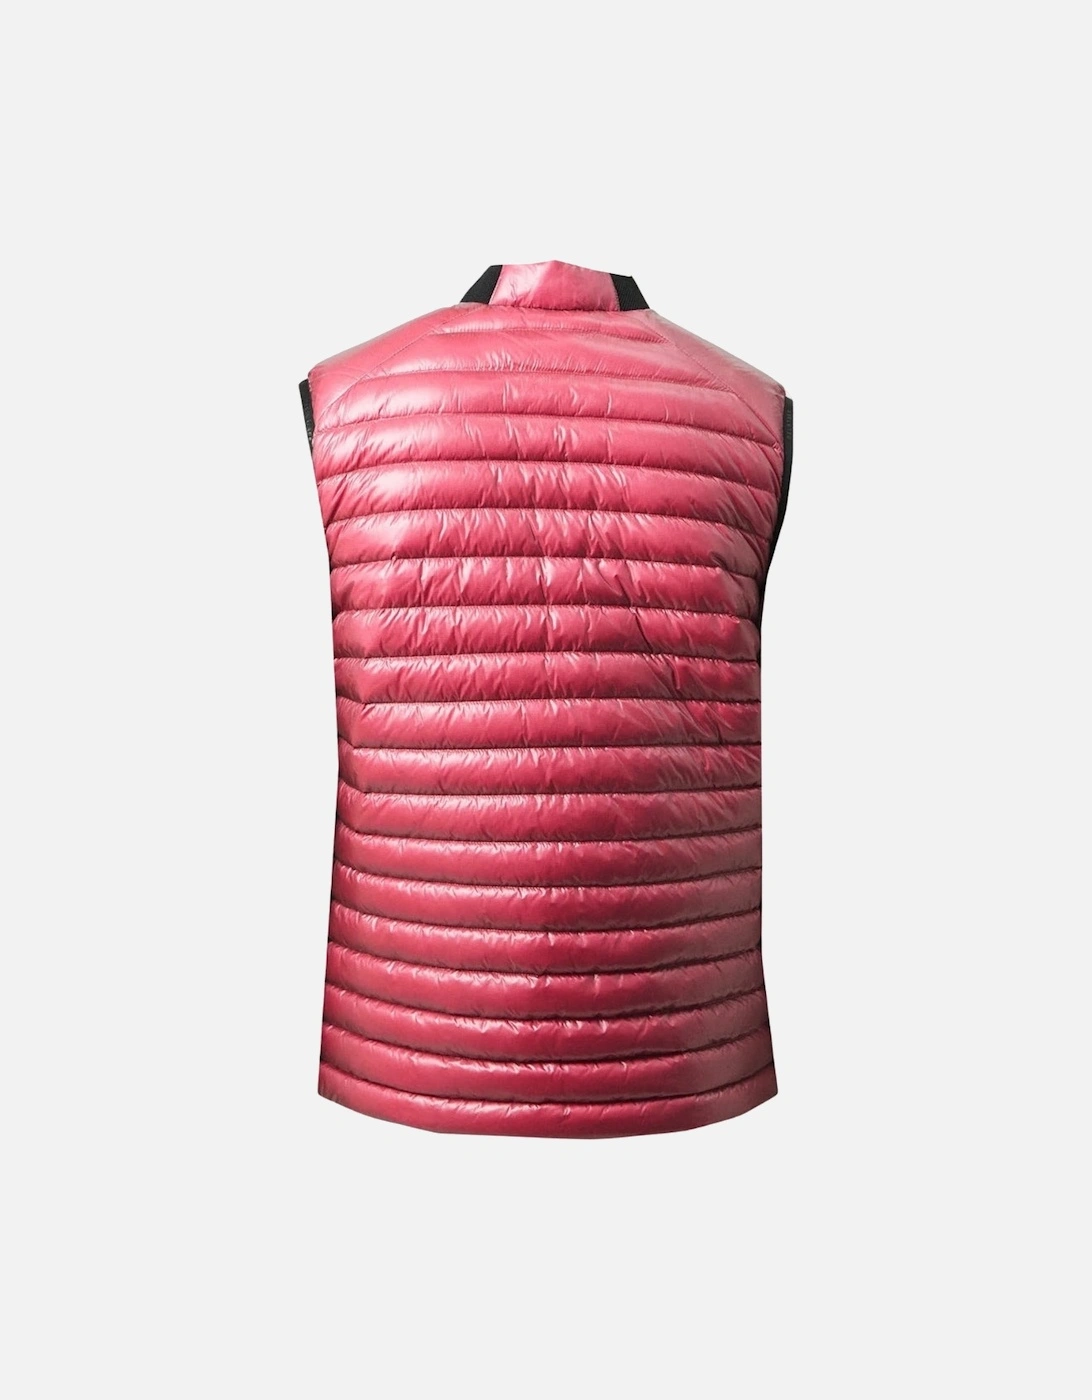 Airframe Neon Shiny Pink Gilet Down Filled Jacket